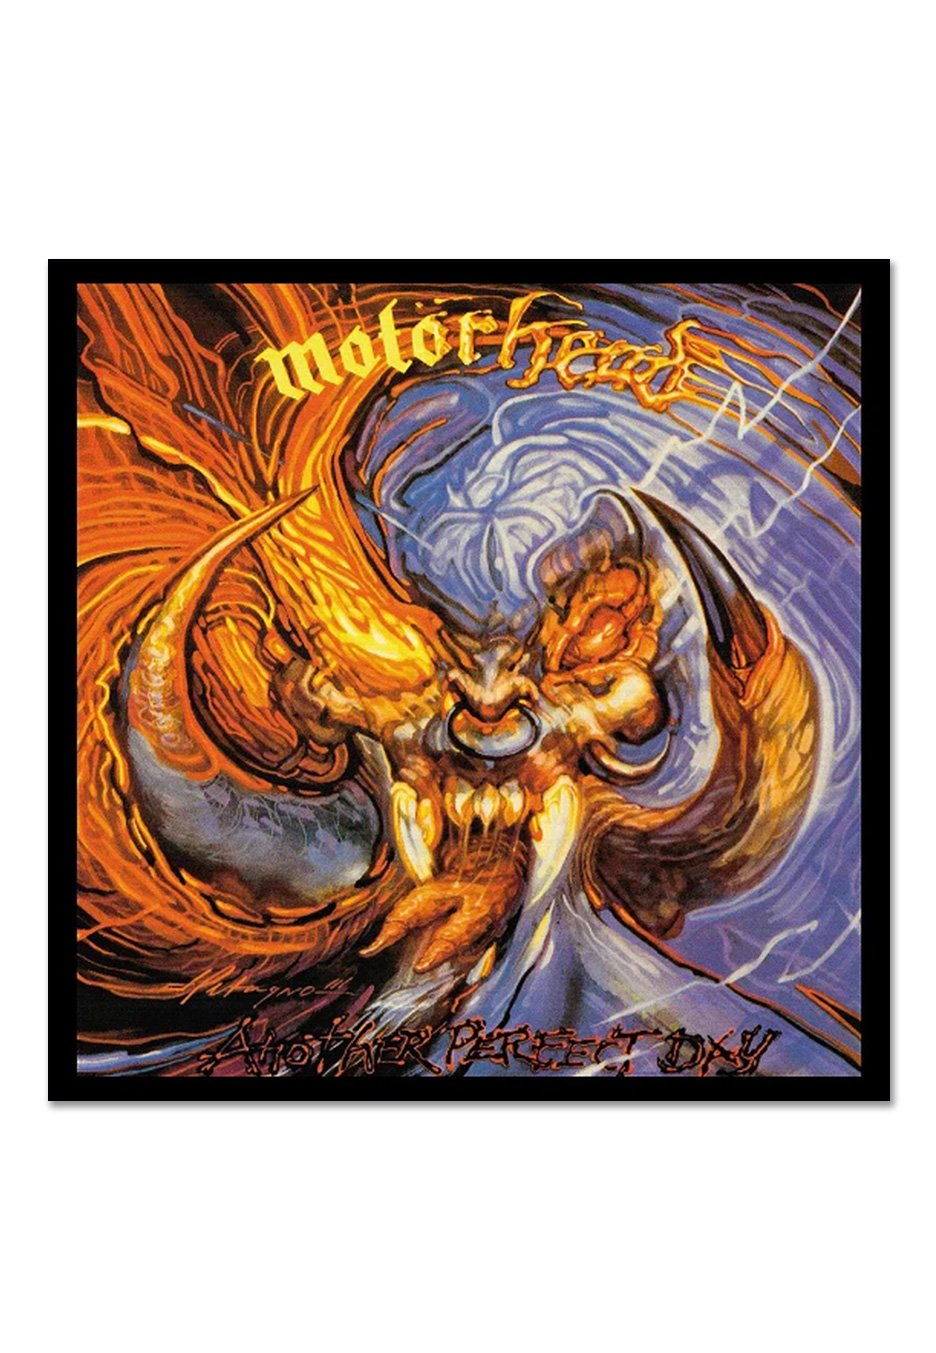 Motörhead - Another Perfect Day (40th Anniversary Edition) - 2 CD